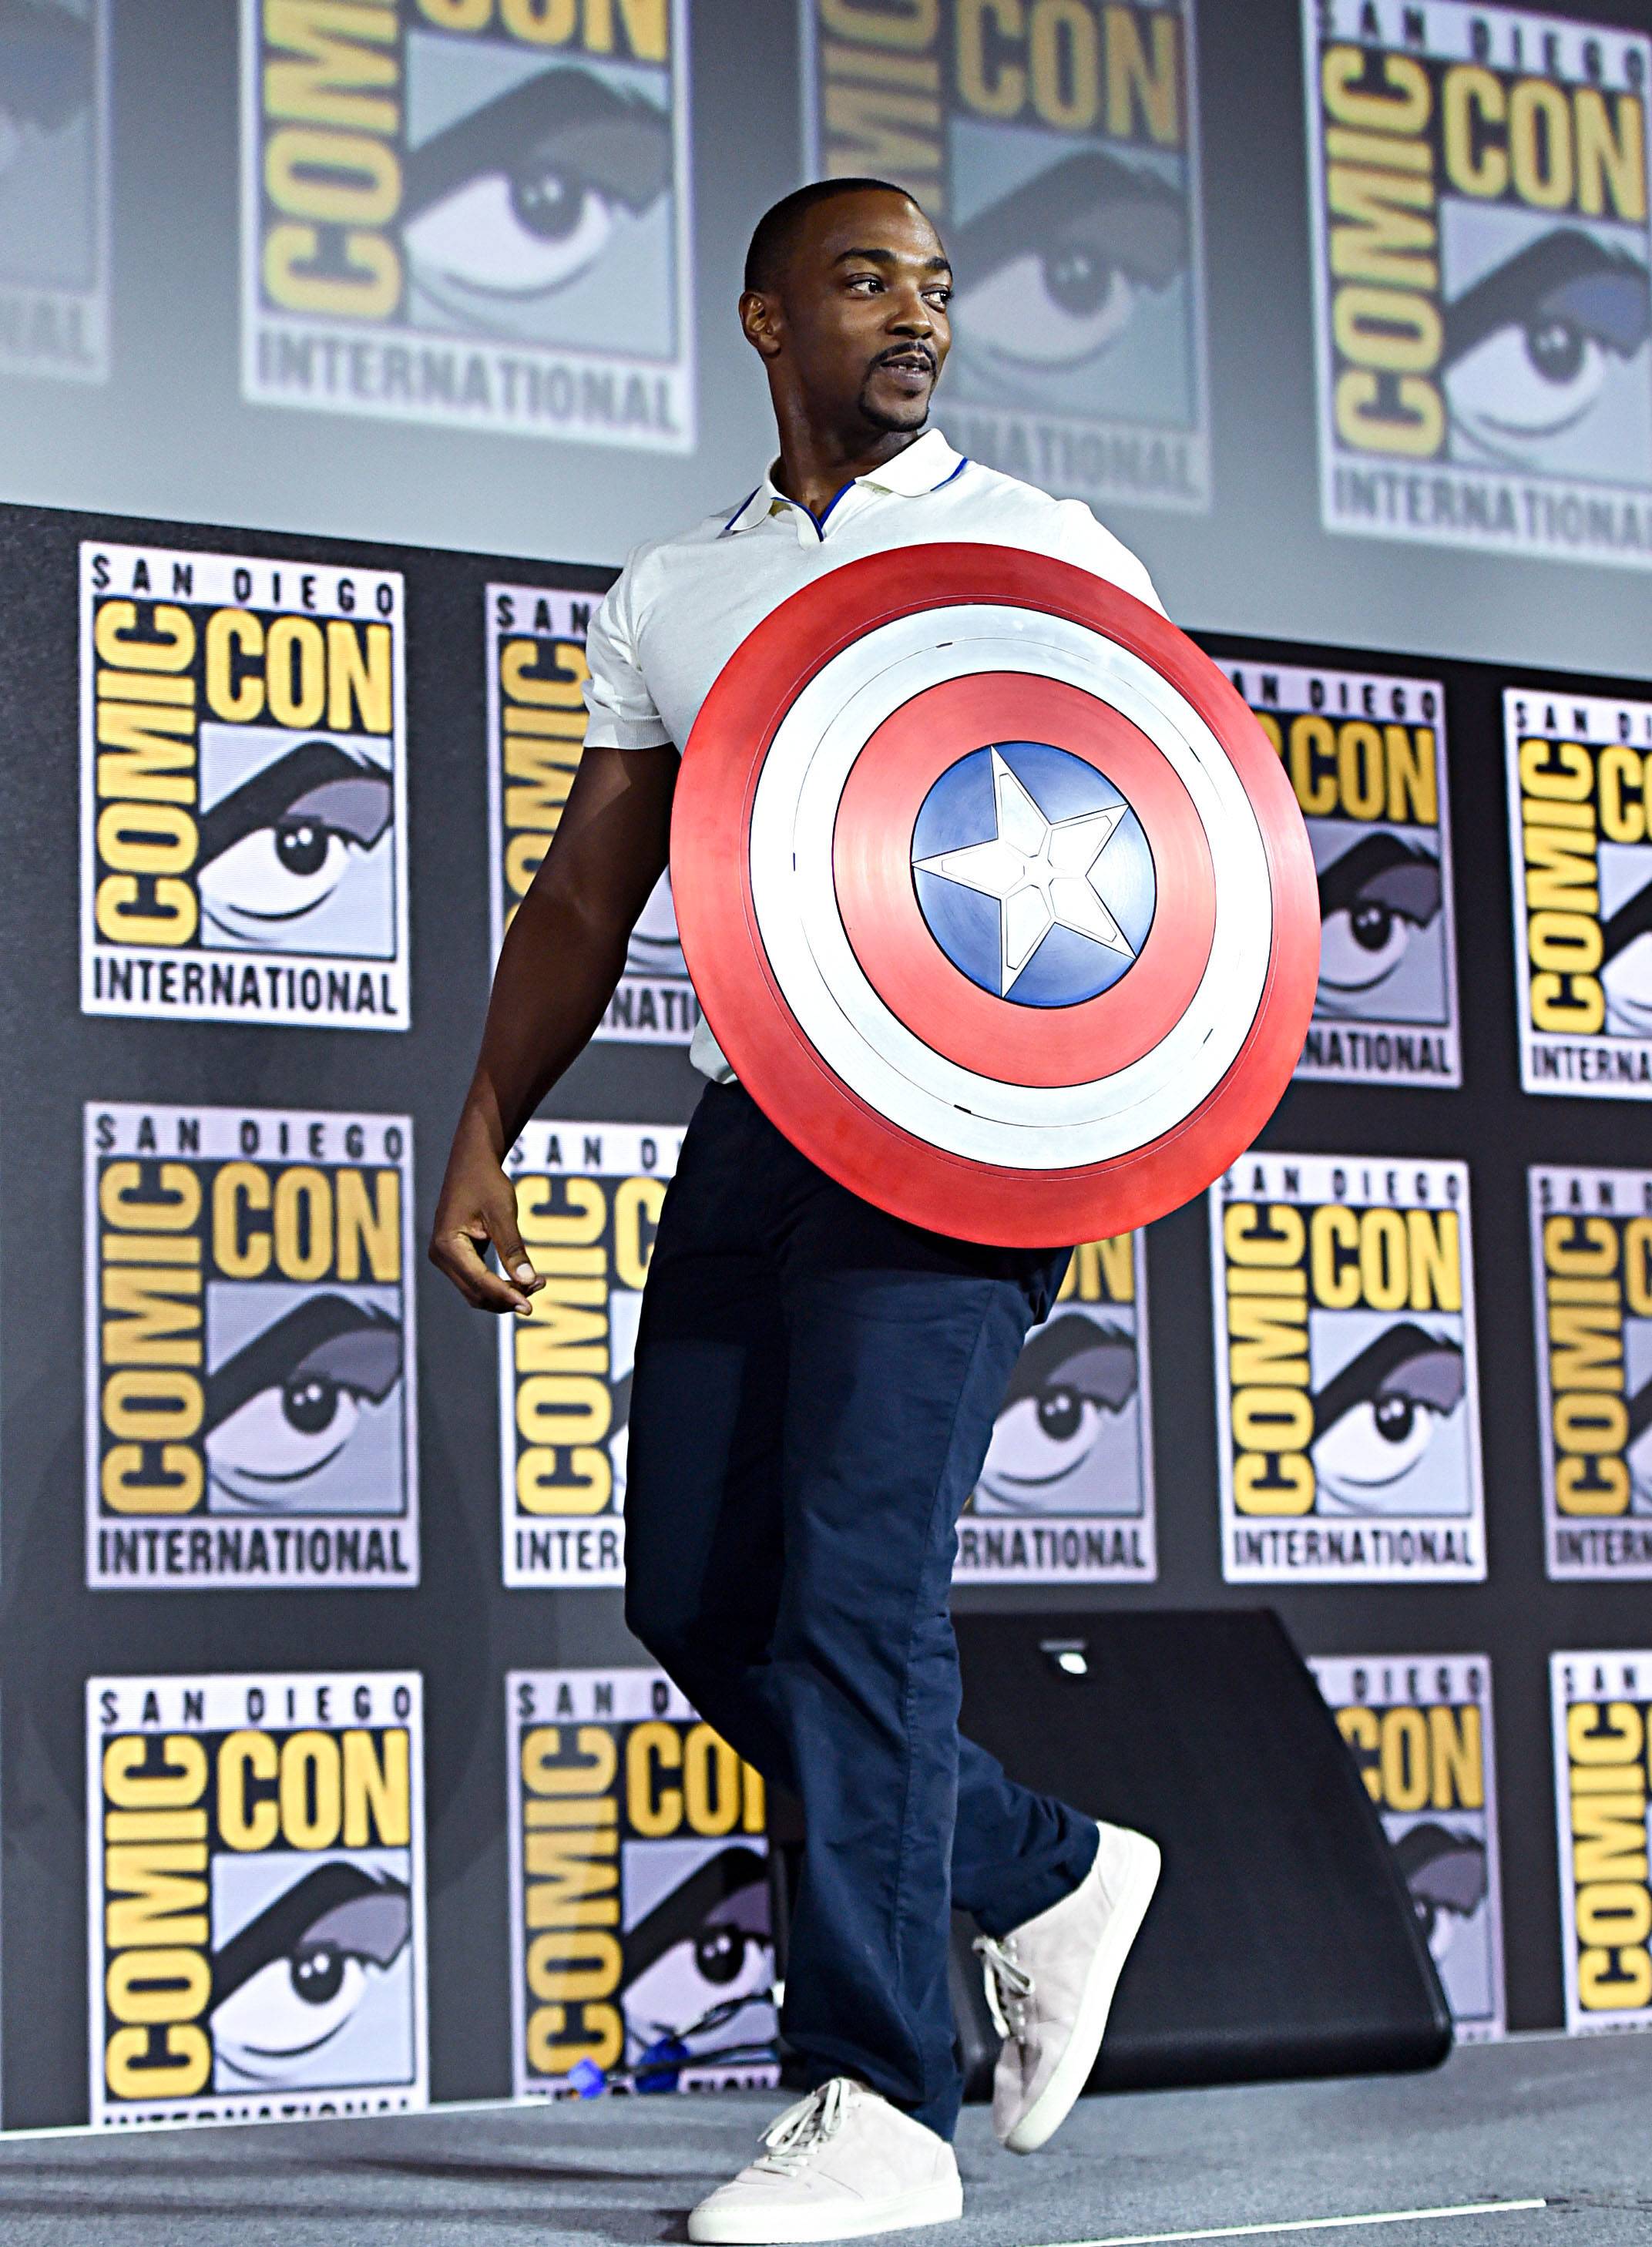 SAN DIEGO, CALIFORNIA - JULY 20: Anthony Mackie of Marvel Studios' 'The Falcon and The Winter Soldier' at the San Diego Comic-Con International 2019 Marvel Studios Panel in Hall H on July 20, 2019 in San Diego, California. (Photo by Alberto E. Rodriguez/Getty Images for Disney)